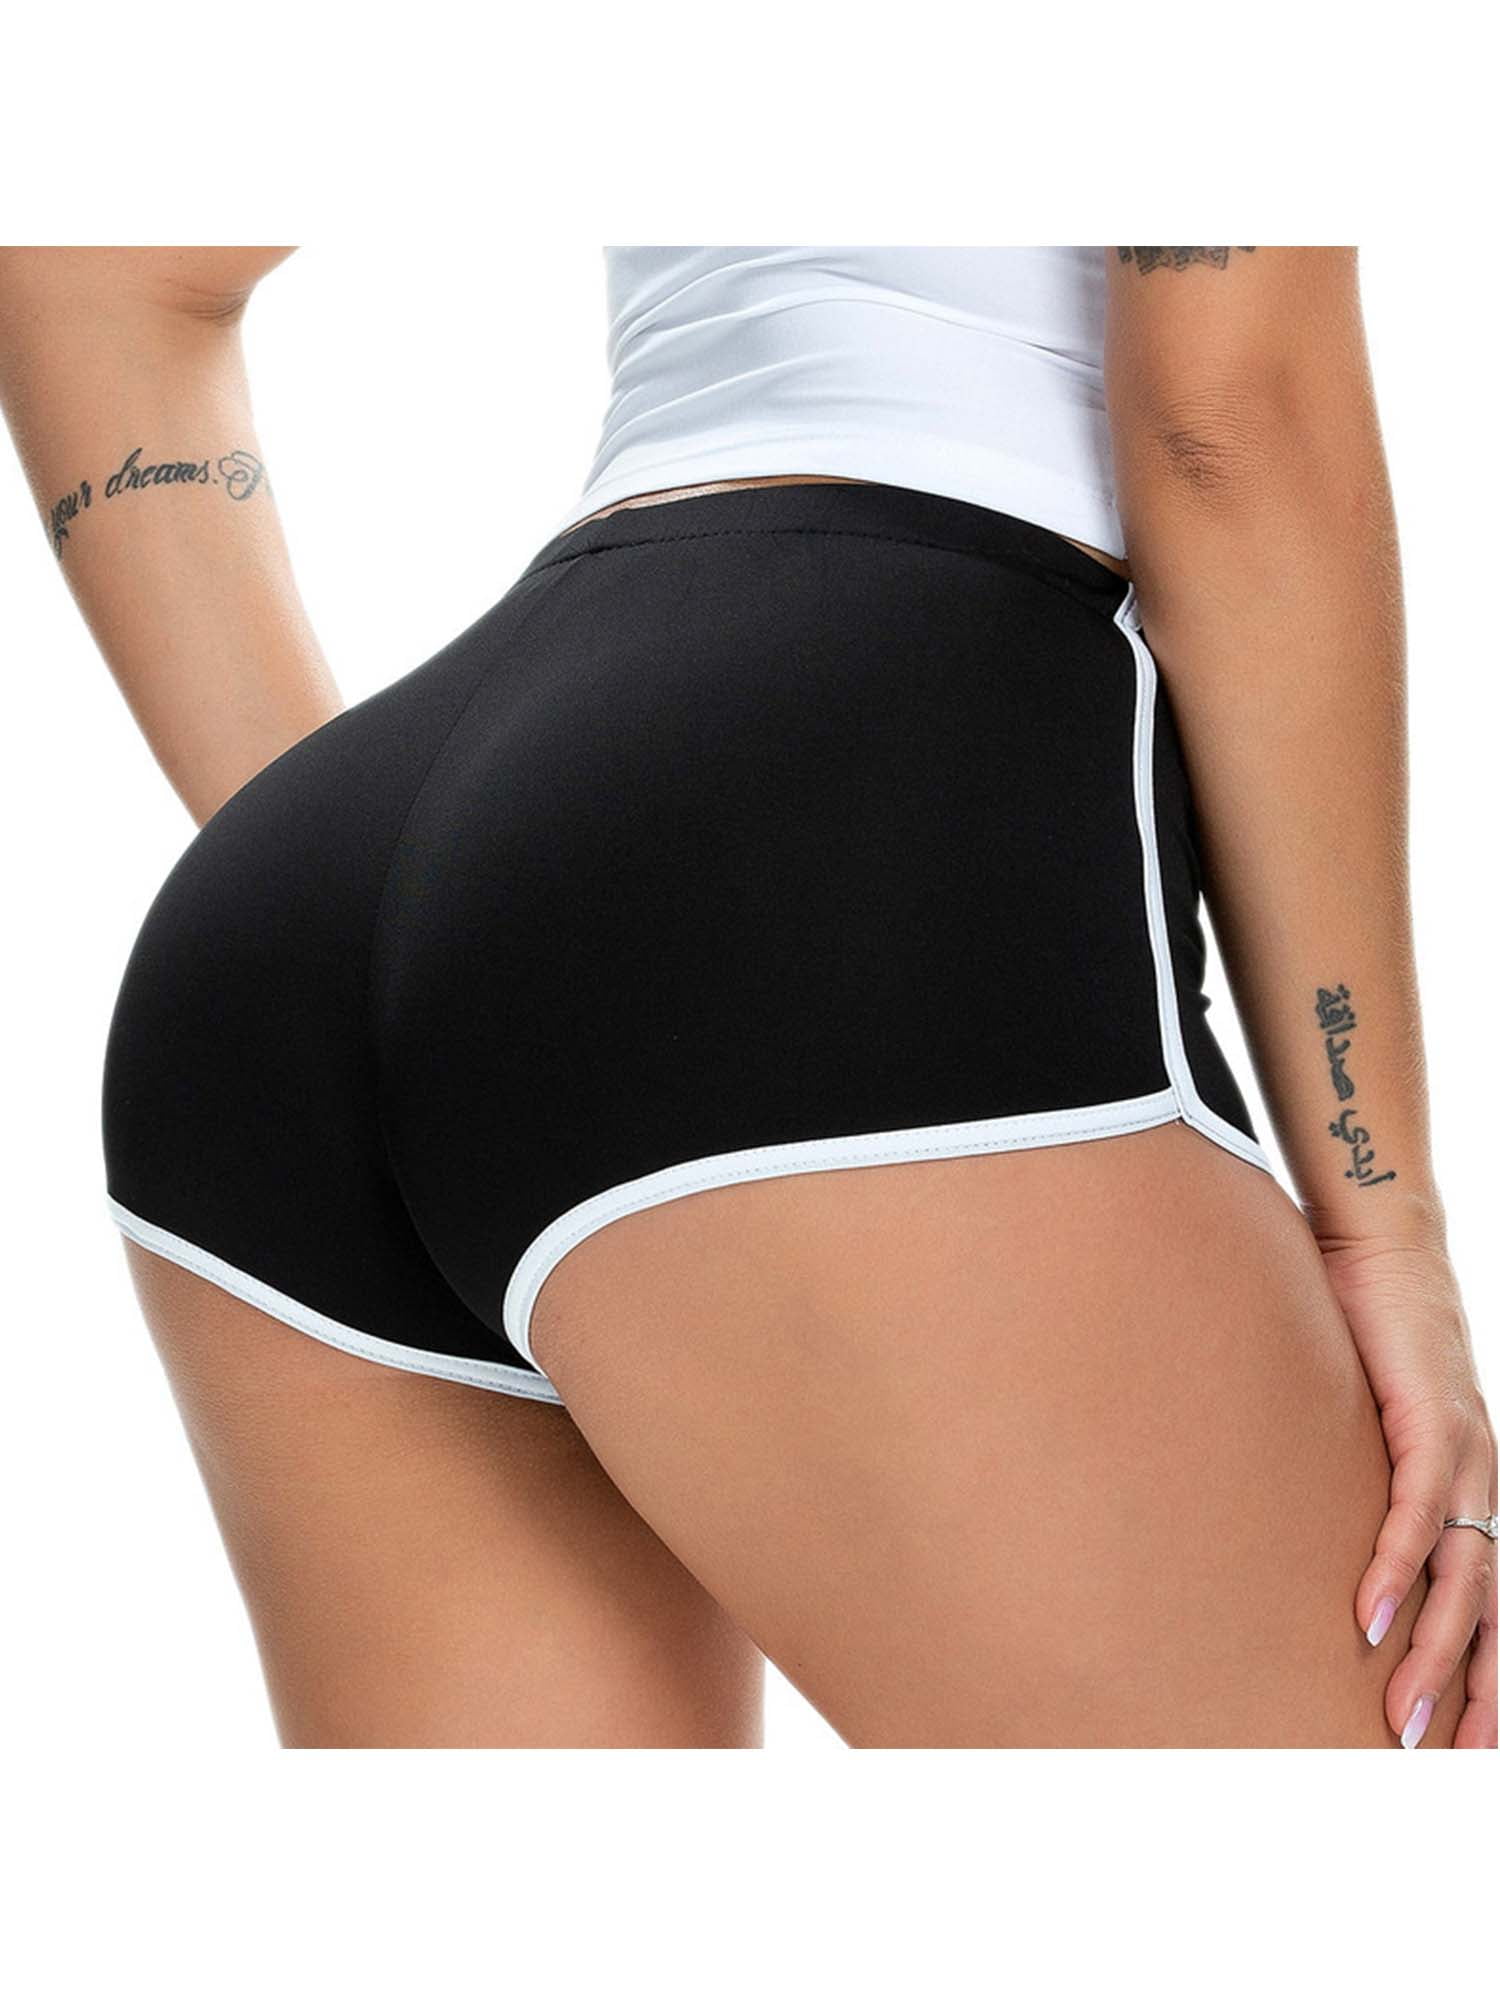 Premium Buttery Soft Stretch Athletic Running Dance Voleyball Short Pants with Stripes Always Women Workout Yoga Shorts